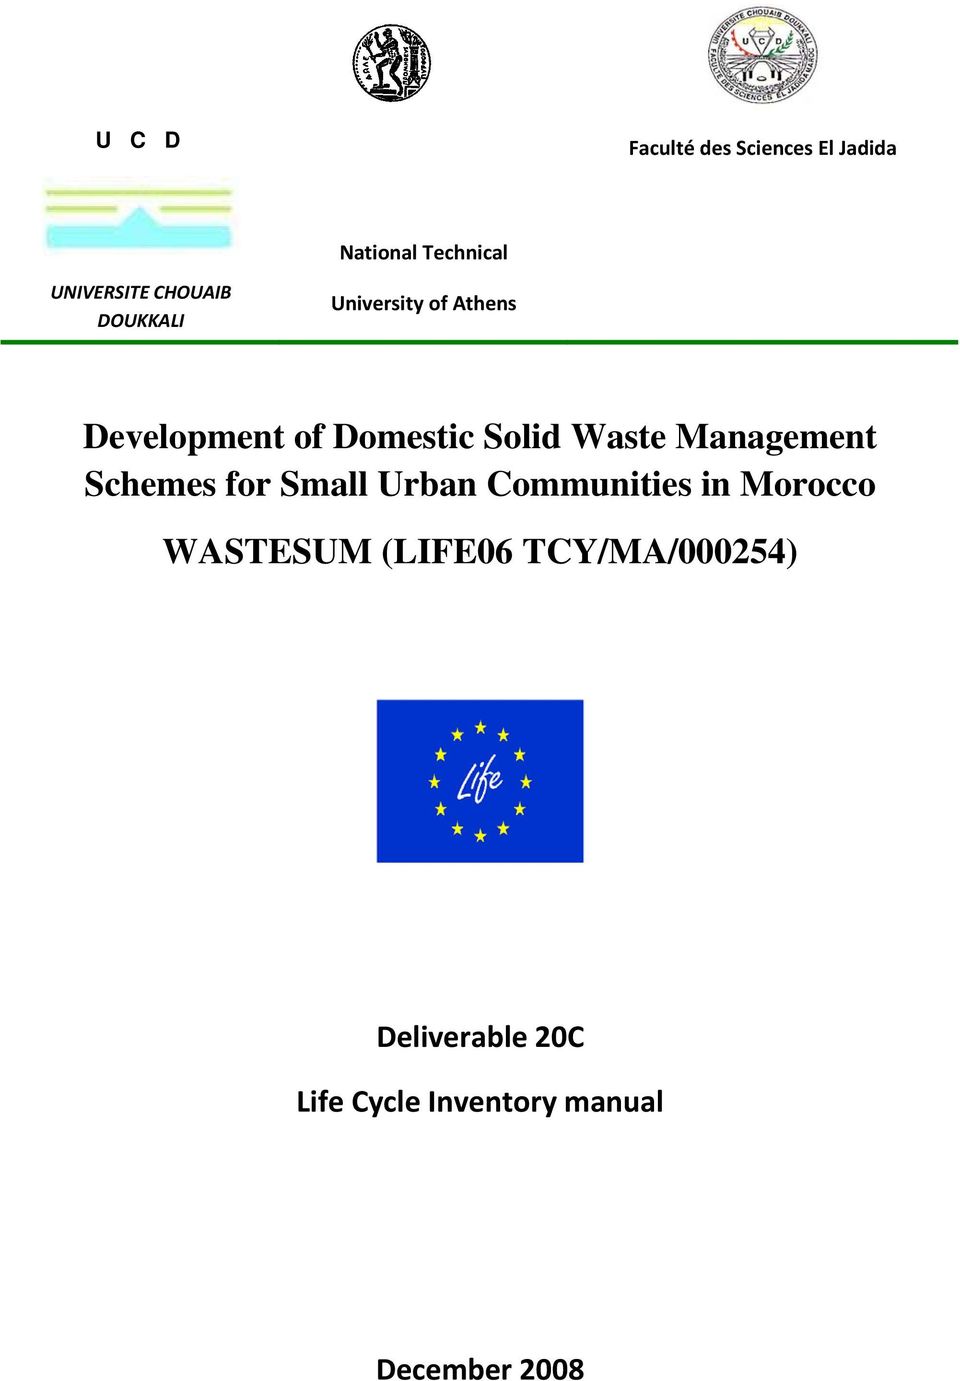 Waste Management Schemes for Small Urban Communities in Morocco